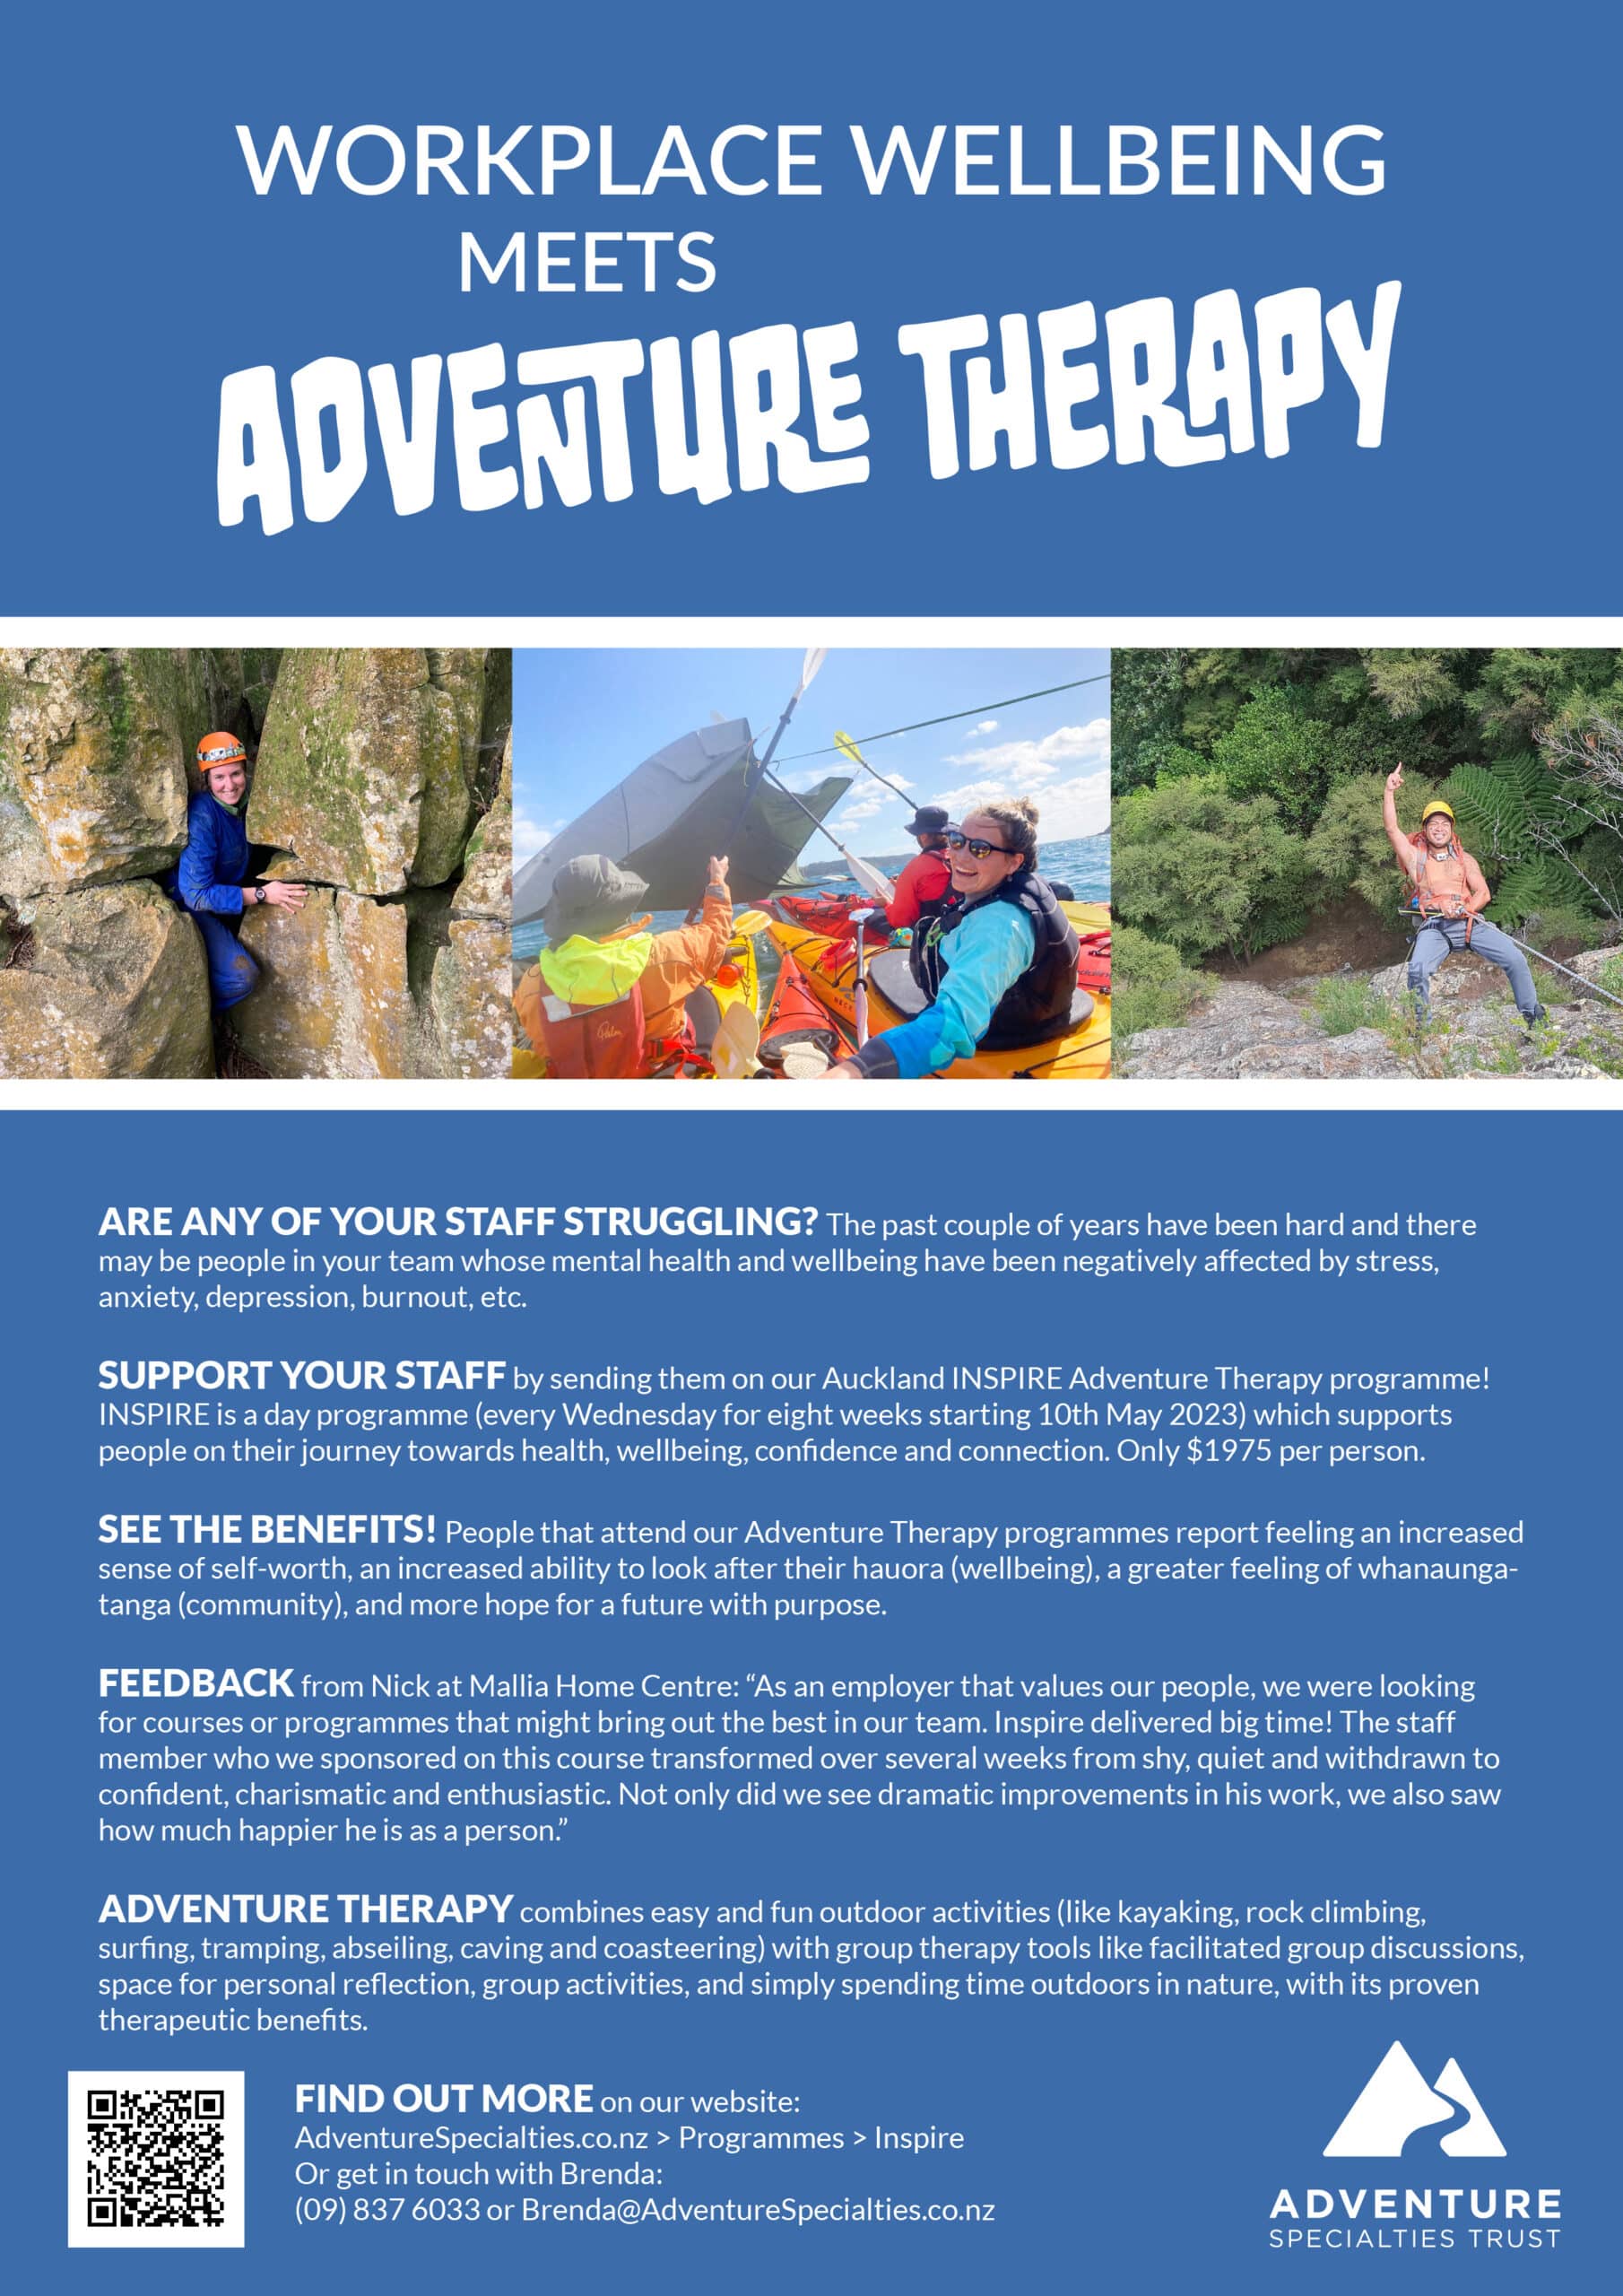 Workplace Wellbeing meets Adventure Therapy